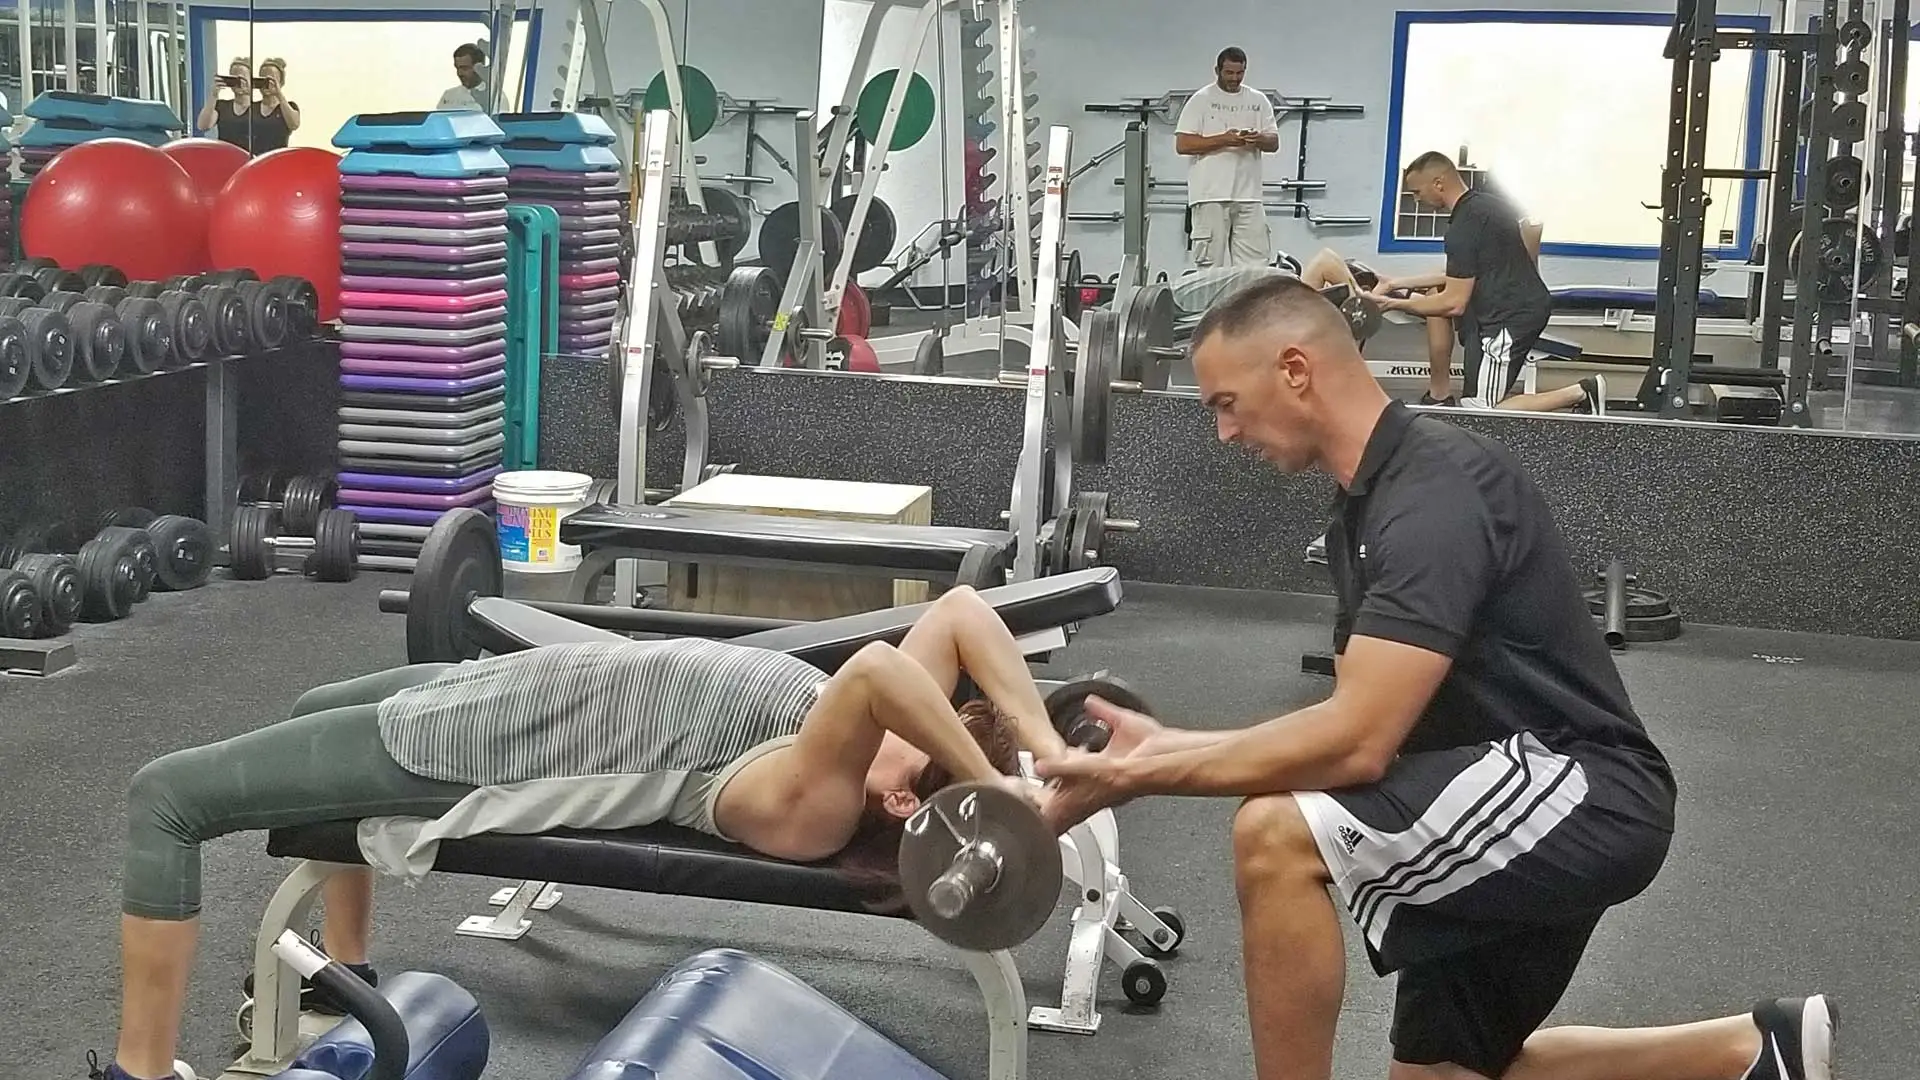 Francois training client on how to do a skull crusher exercise.